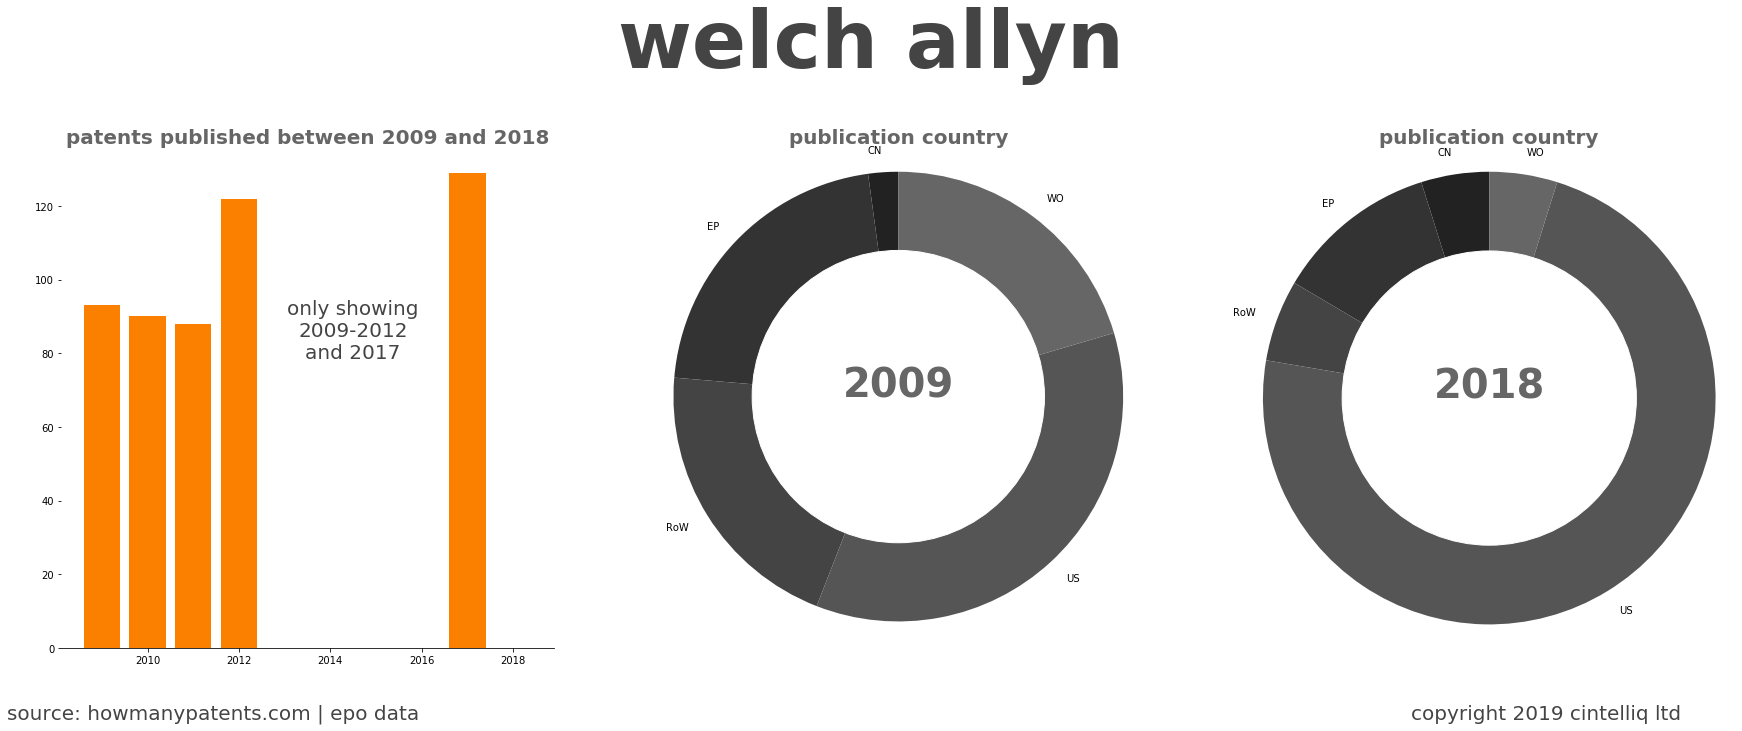 summary of patents for Welch Allyn